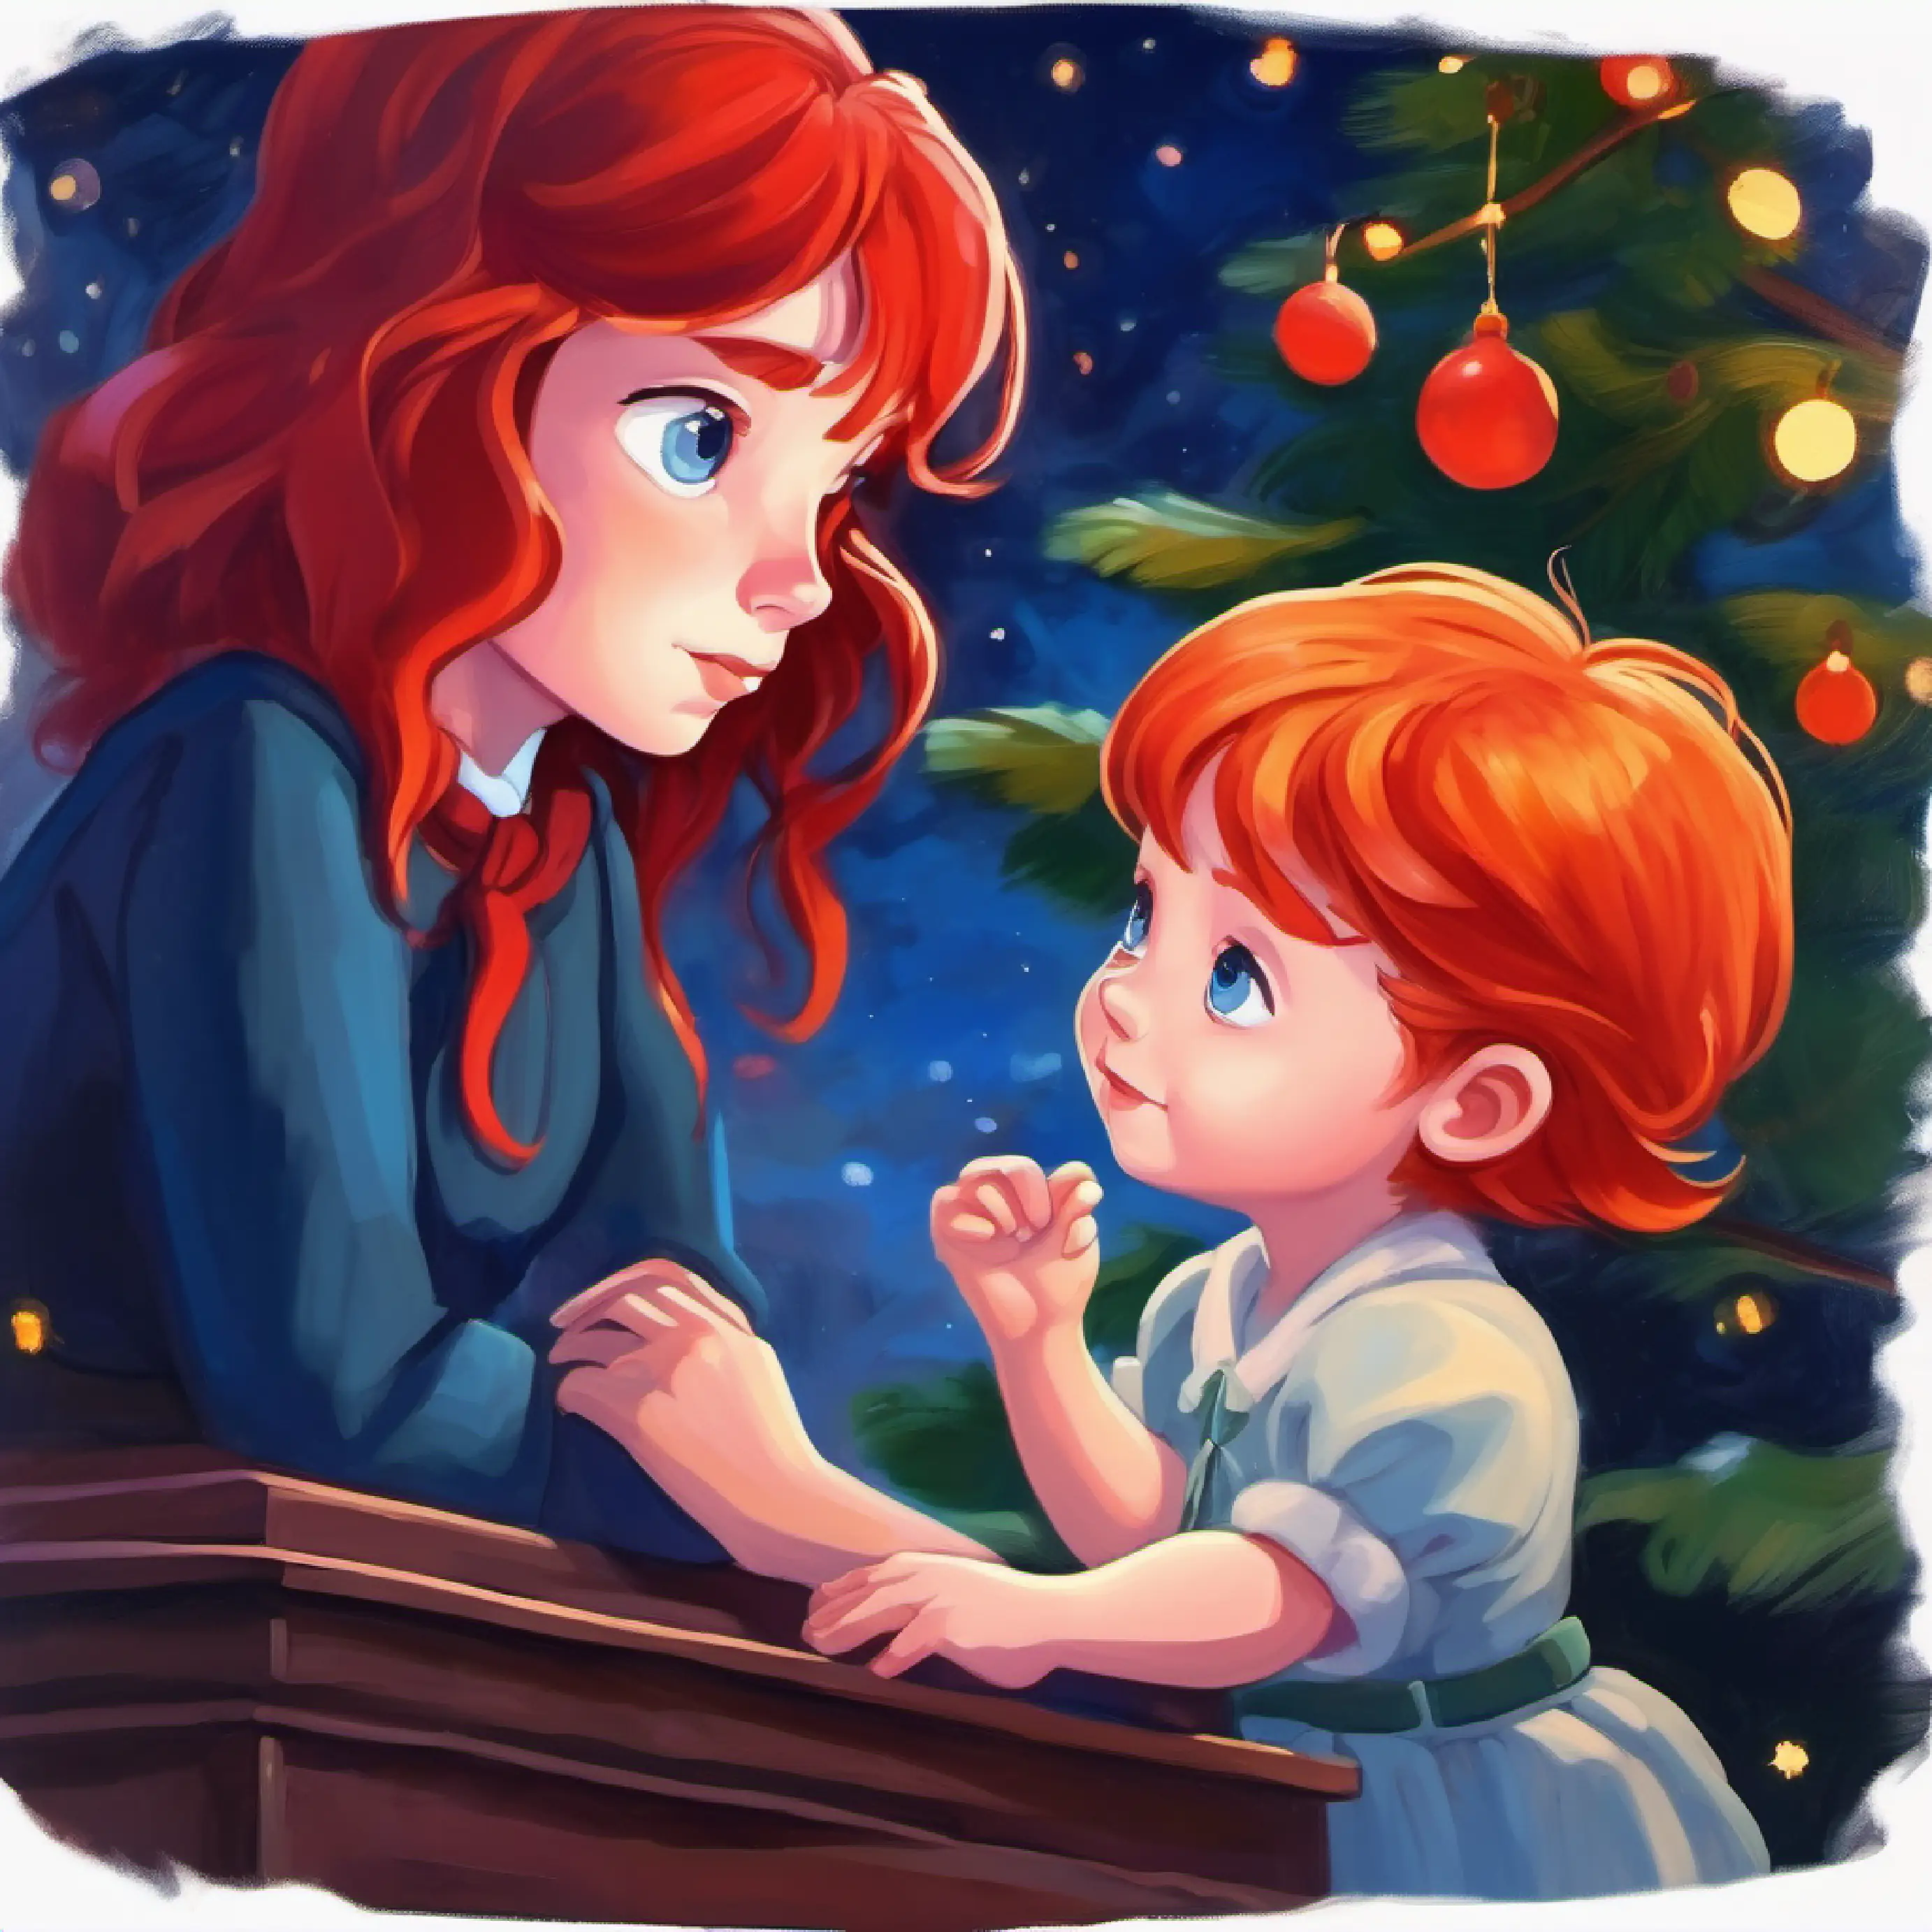 Night falls, Duncan reassures Curious young girl, bright blue eyes, red hair, inquisitive as she falls asleep.